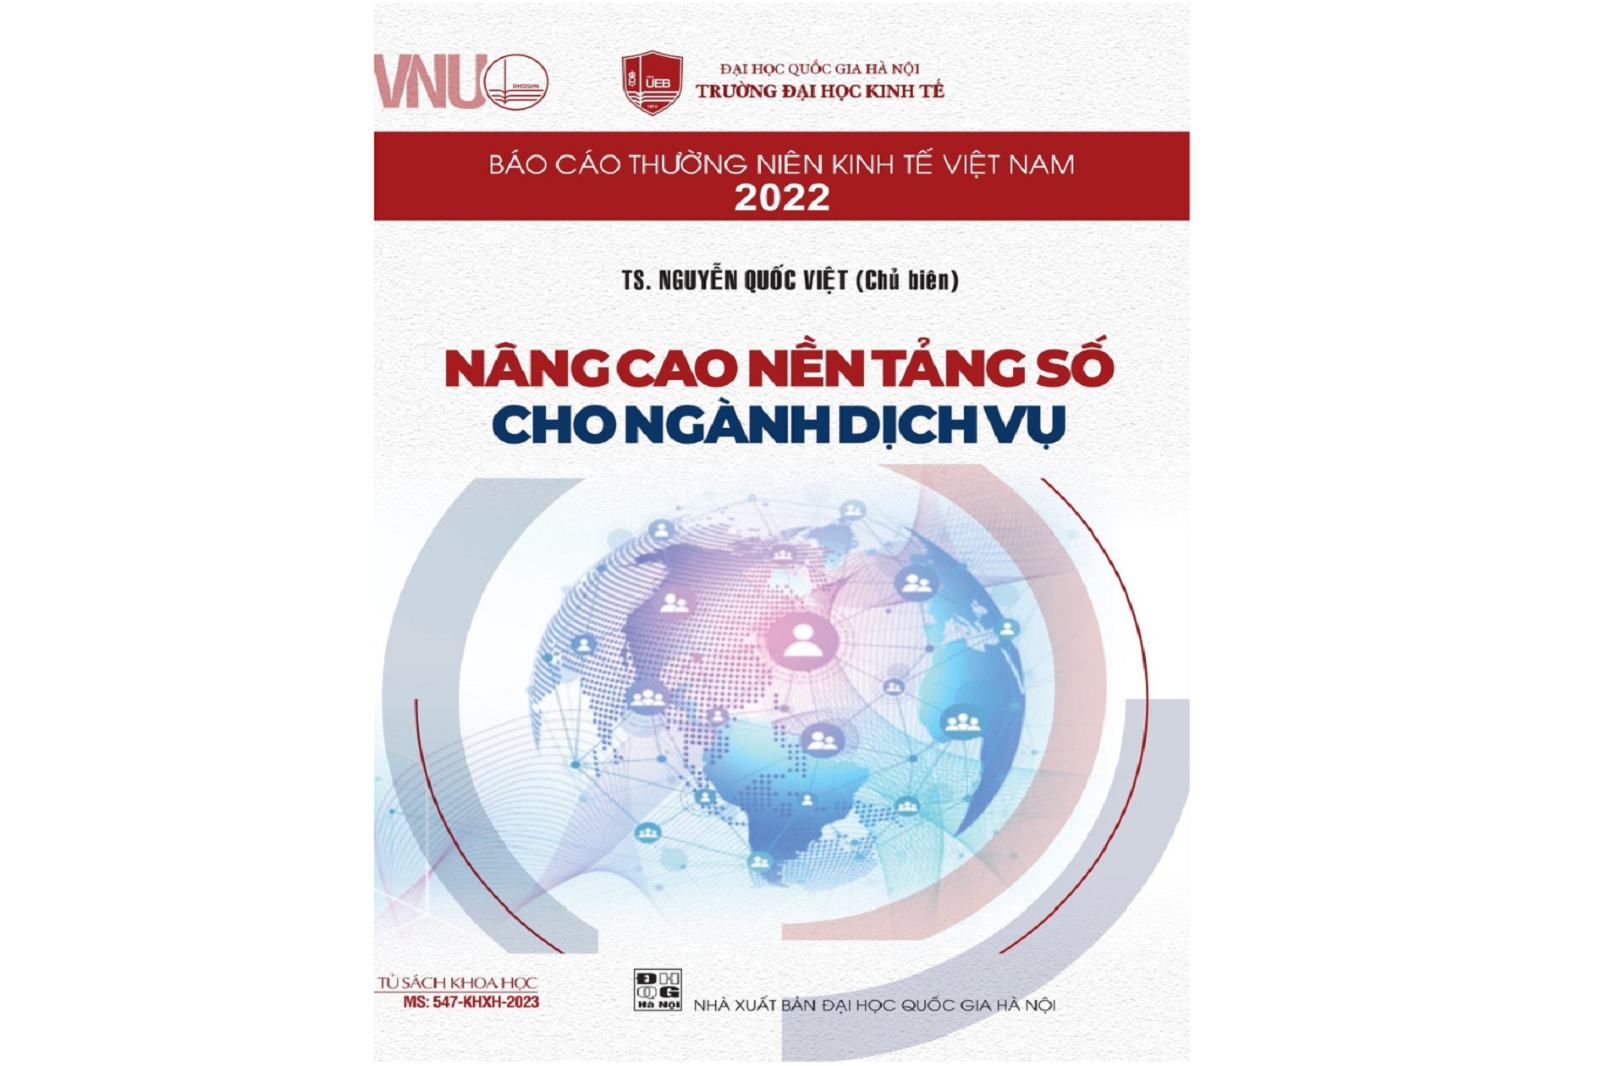 Vietnam Economic Annual Report 2022: Enhancing the Digital Platform for the Service Industry